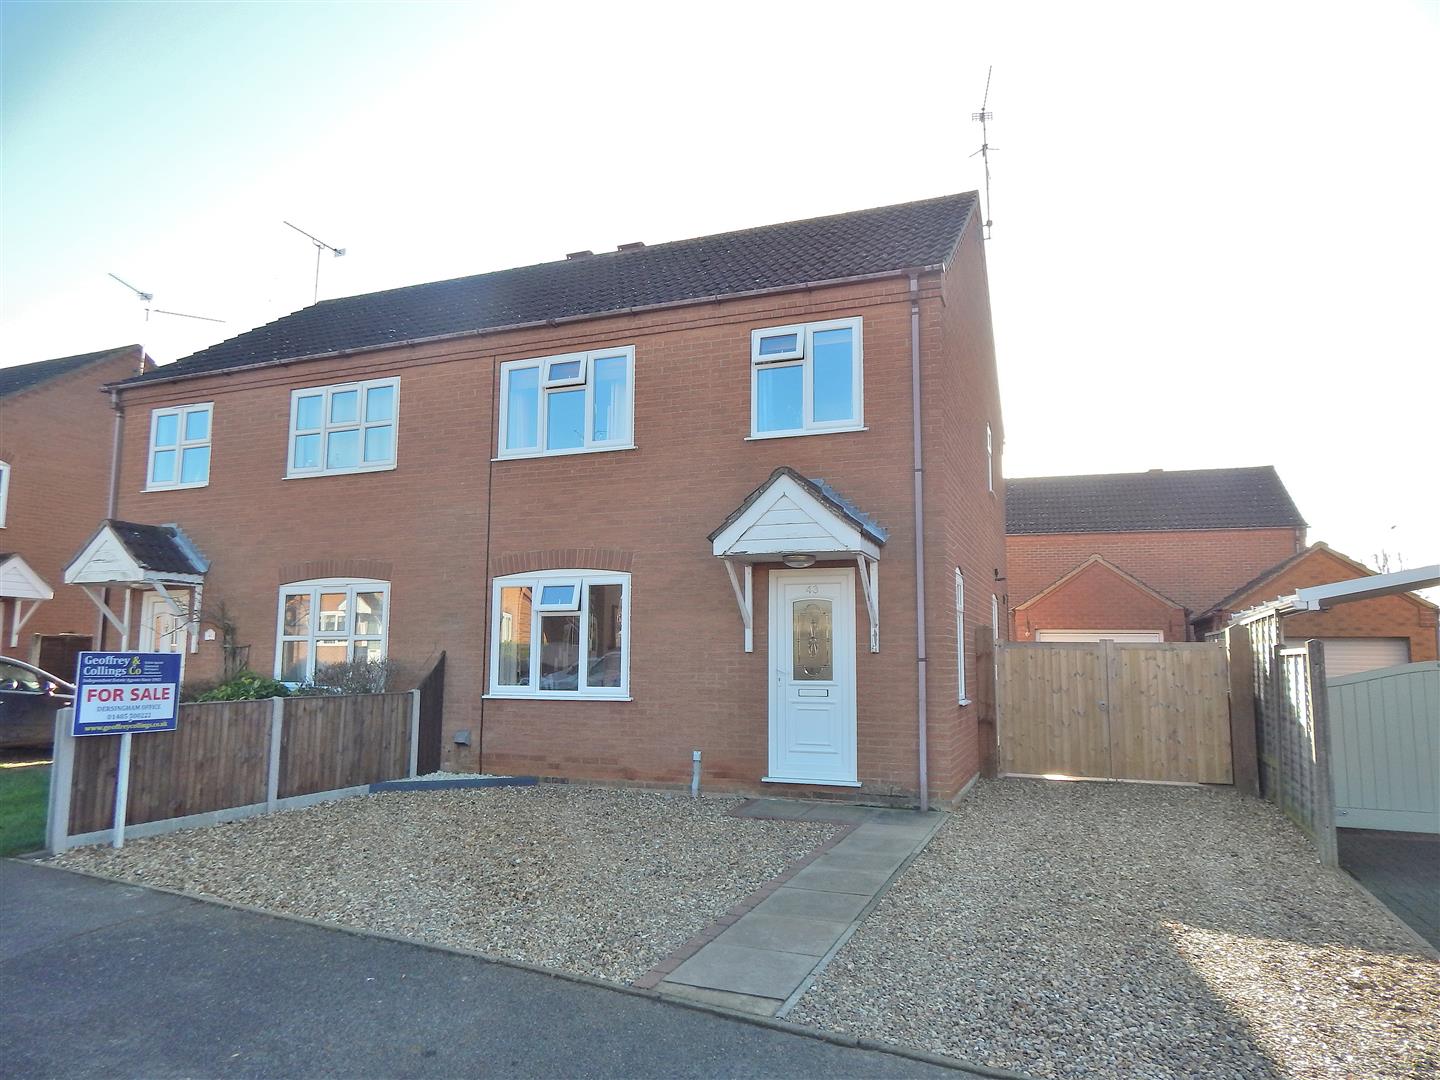 3 bed semi-detached house for sale in Wallace Twite Way, King's Lynn, PE31